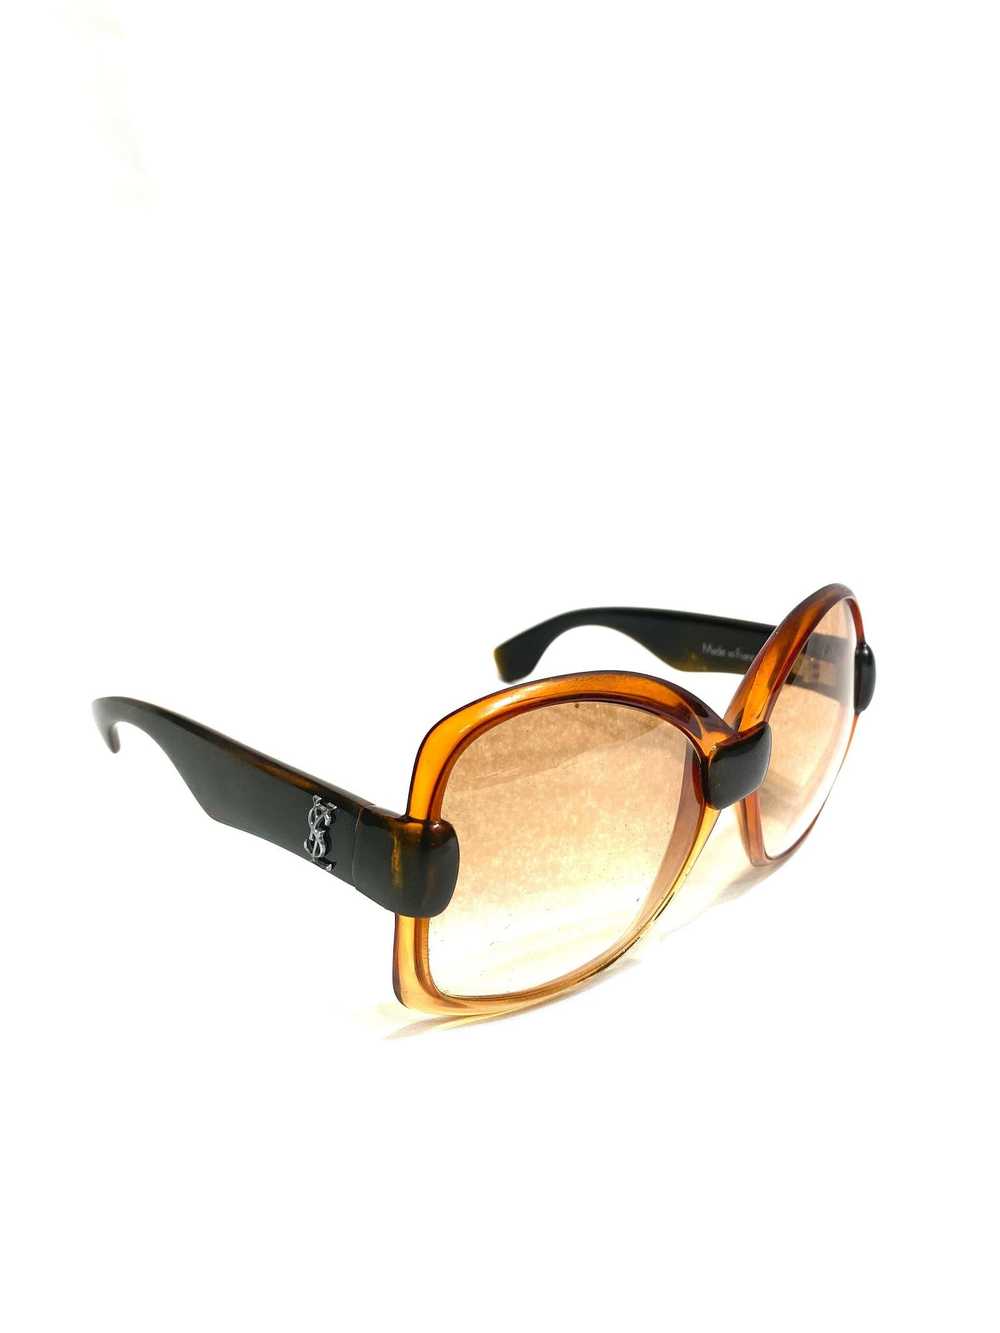 Vintage YSL Brown and Black Square Sunglasses - image 10